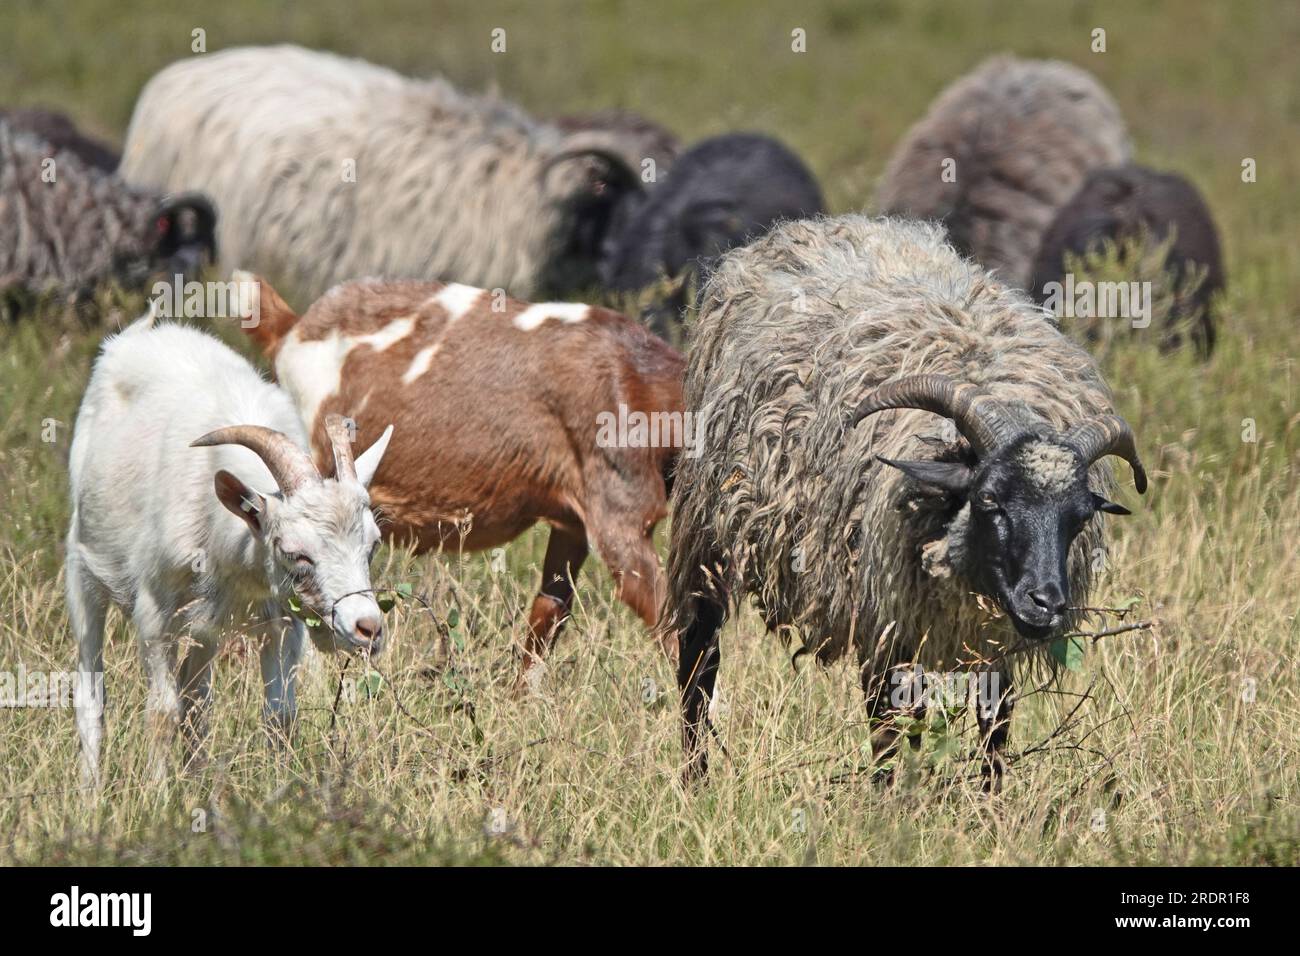 A flock of sheep combined with goats on the Lueneburg heath in Germany. The sheep are of the Heidschnucke breed. The vegetation is dry. It has not rai Stock Photo